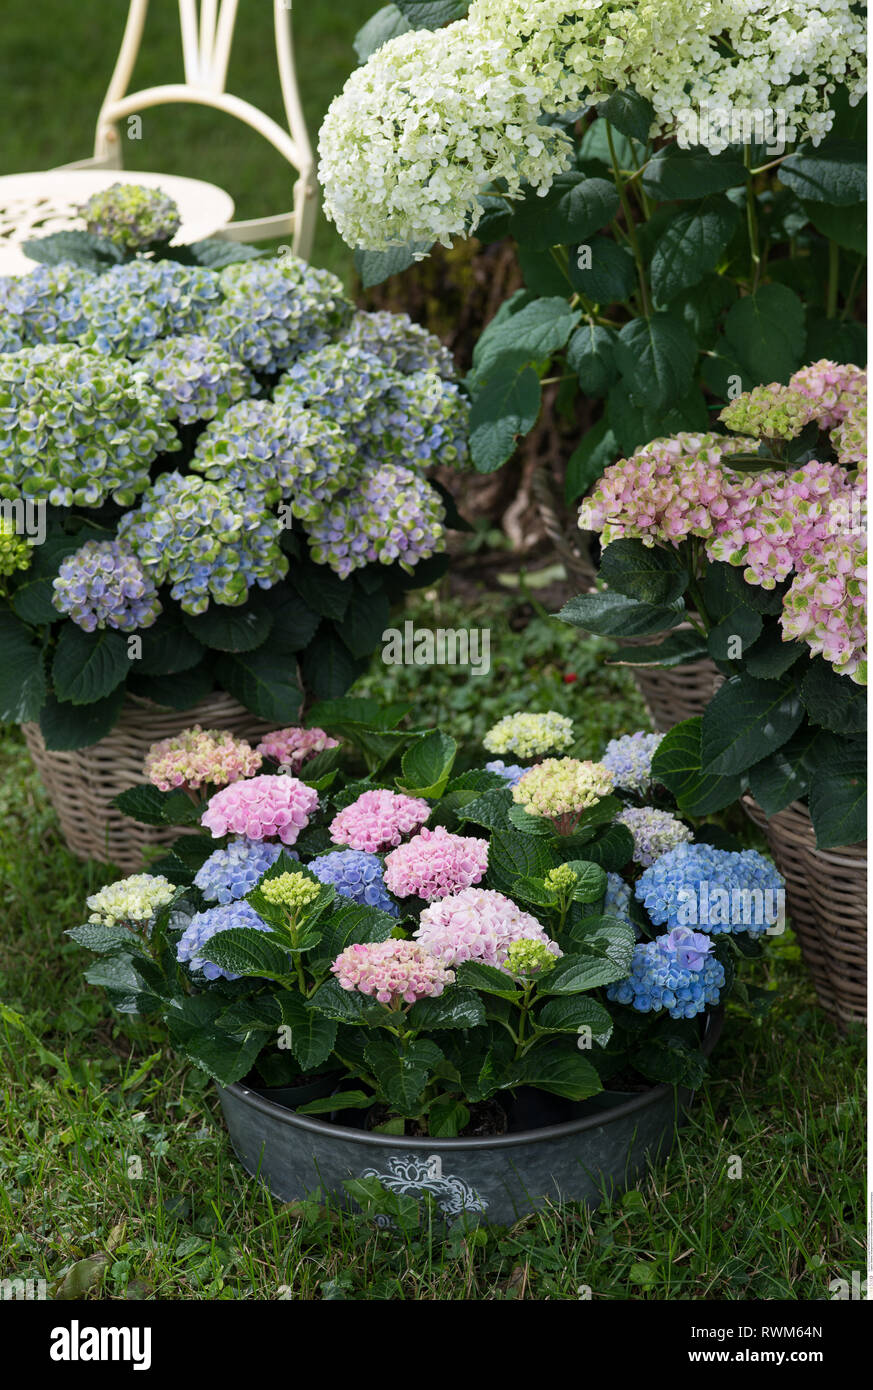 botany, arrangement of hydrangea, Caution! For Greetingcard-Use / Postcard-Use In German Speaking Countries Certain Restrictions May Apply Stock Photo